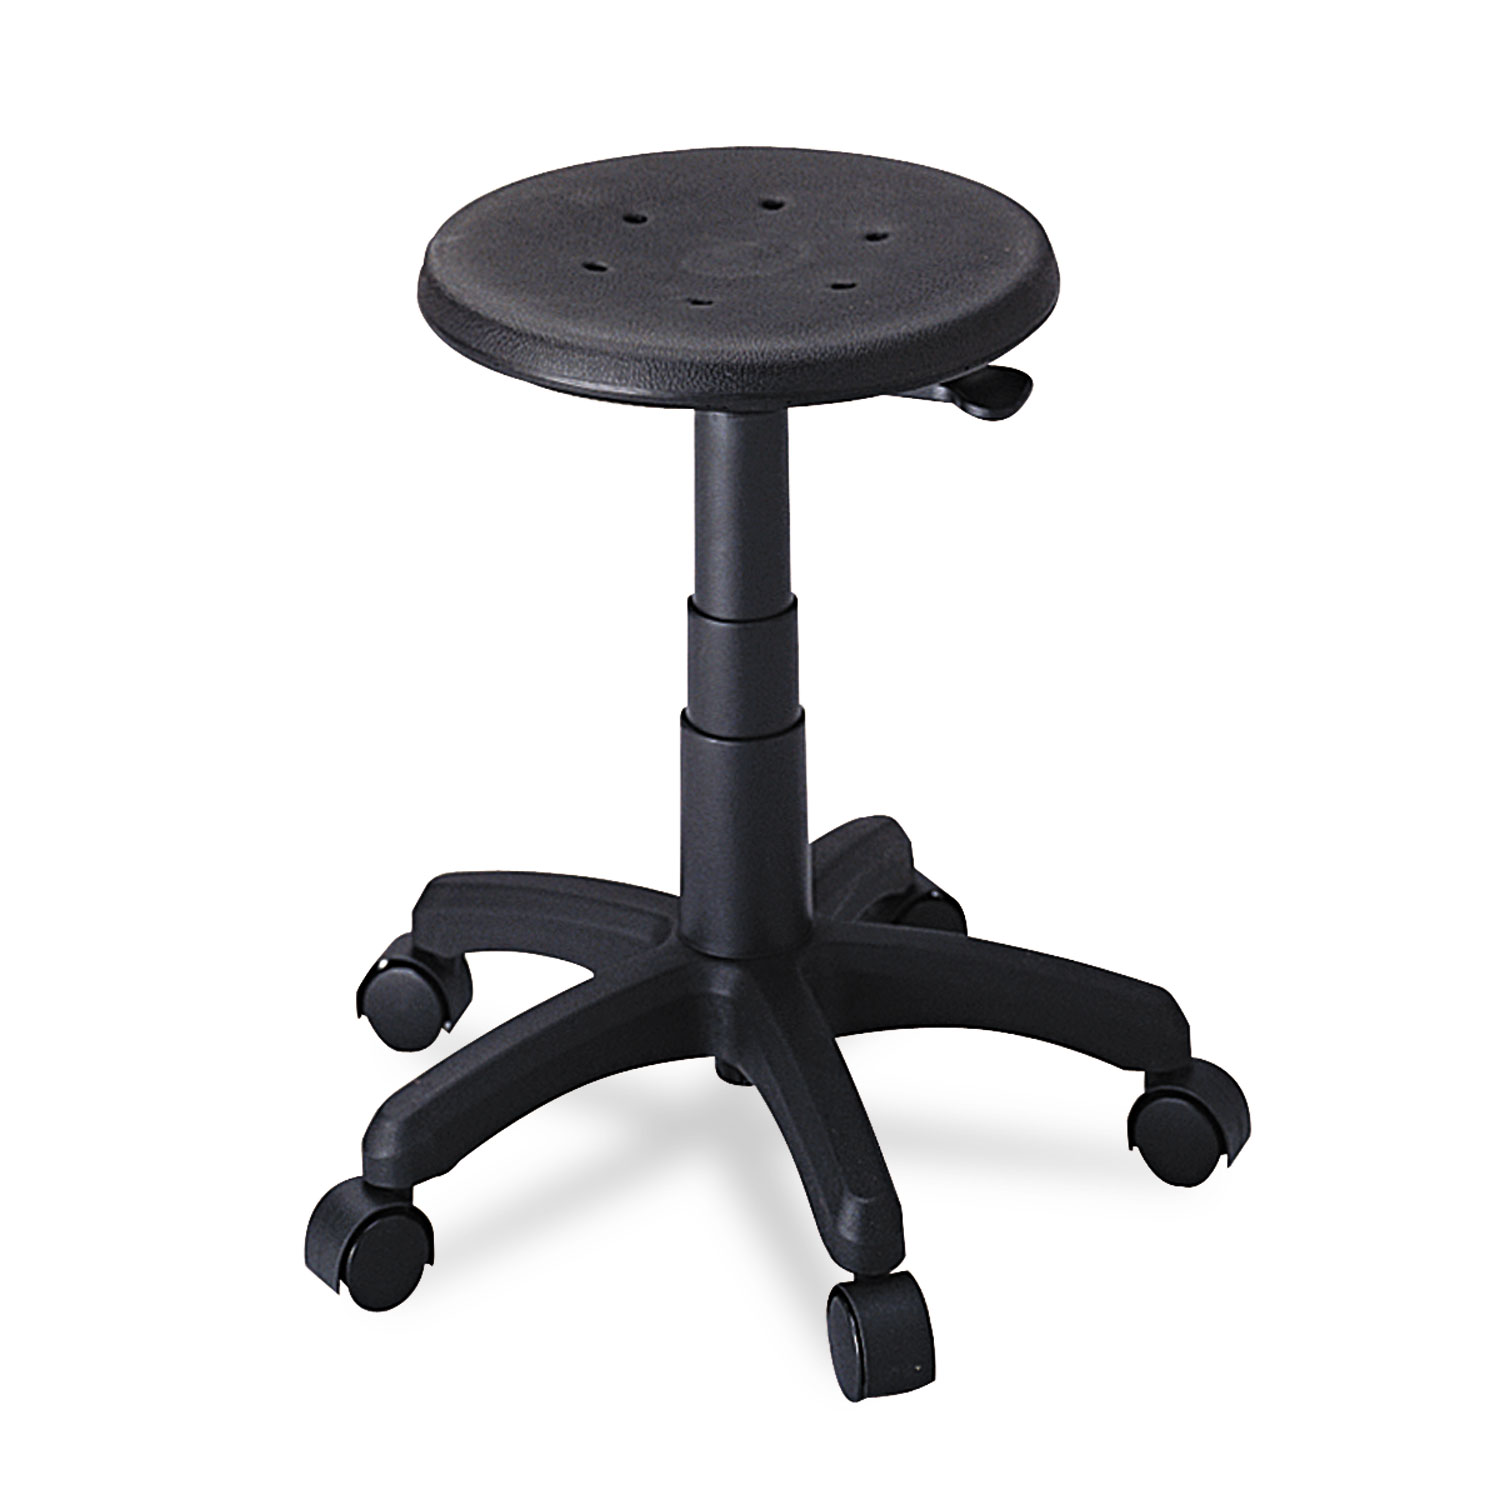 Office Stool with Casters, Seat: 14in dia. x 16-21, Black